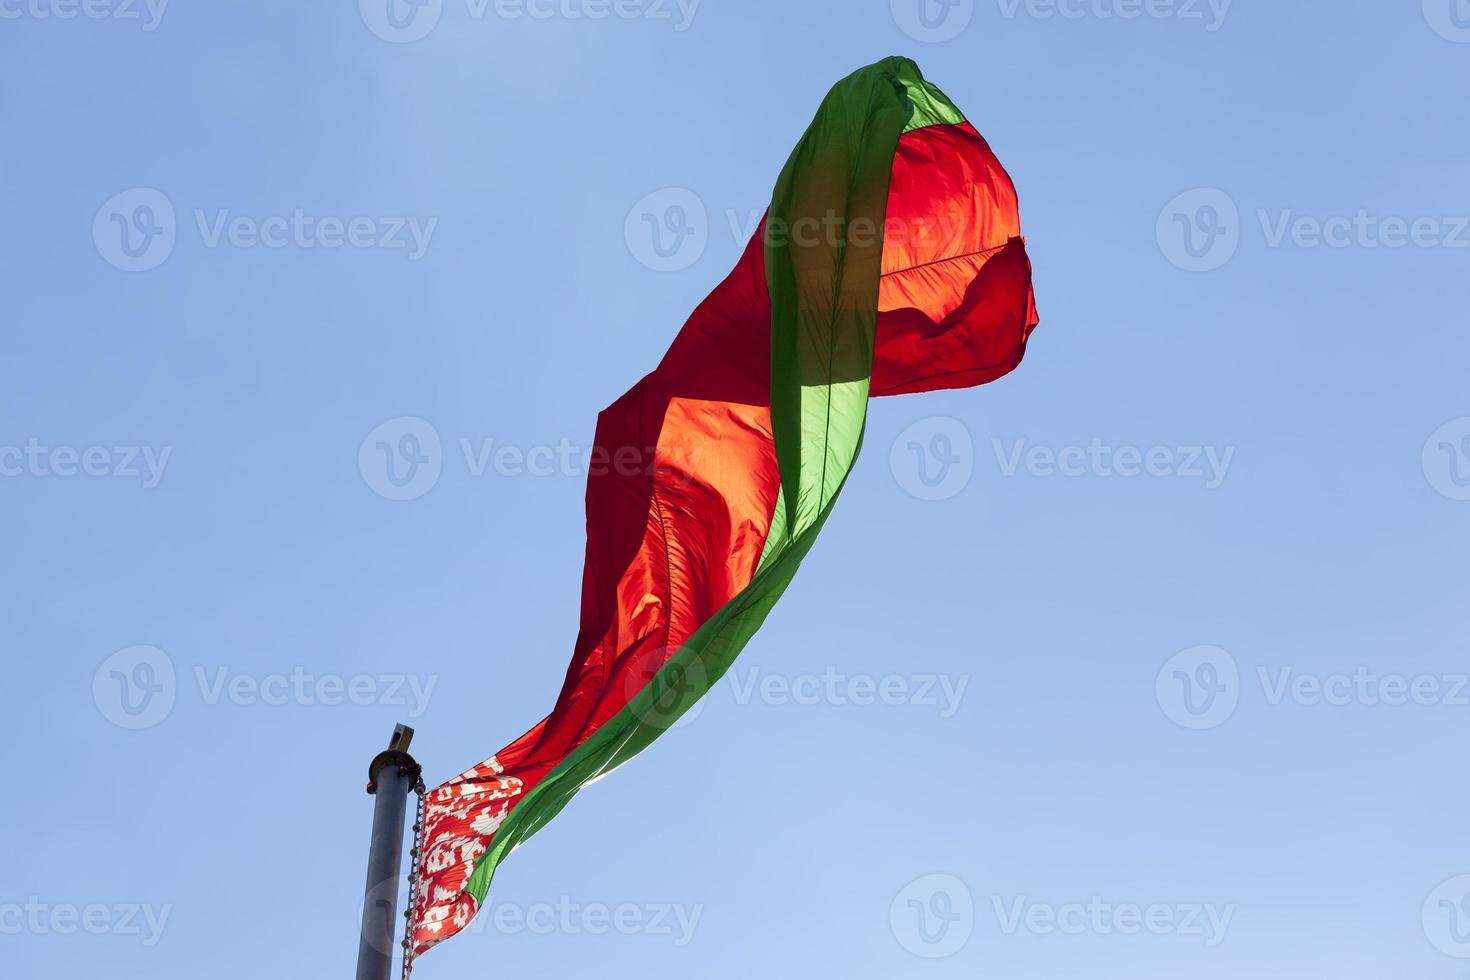 belarusian state flag on a blue sky photo